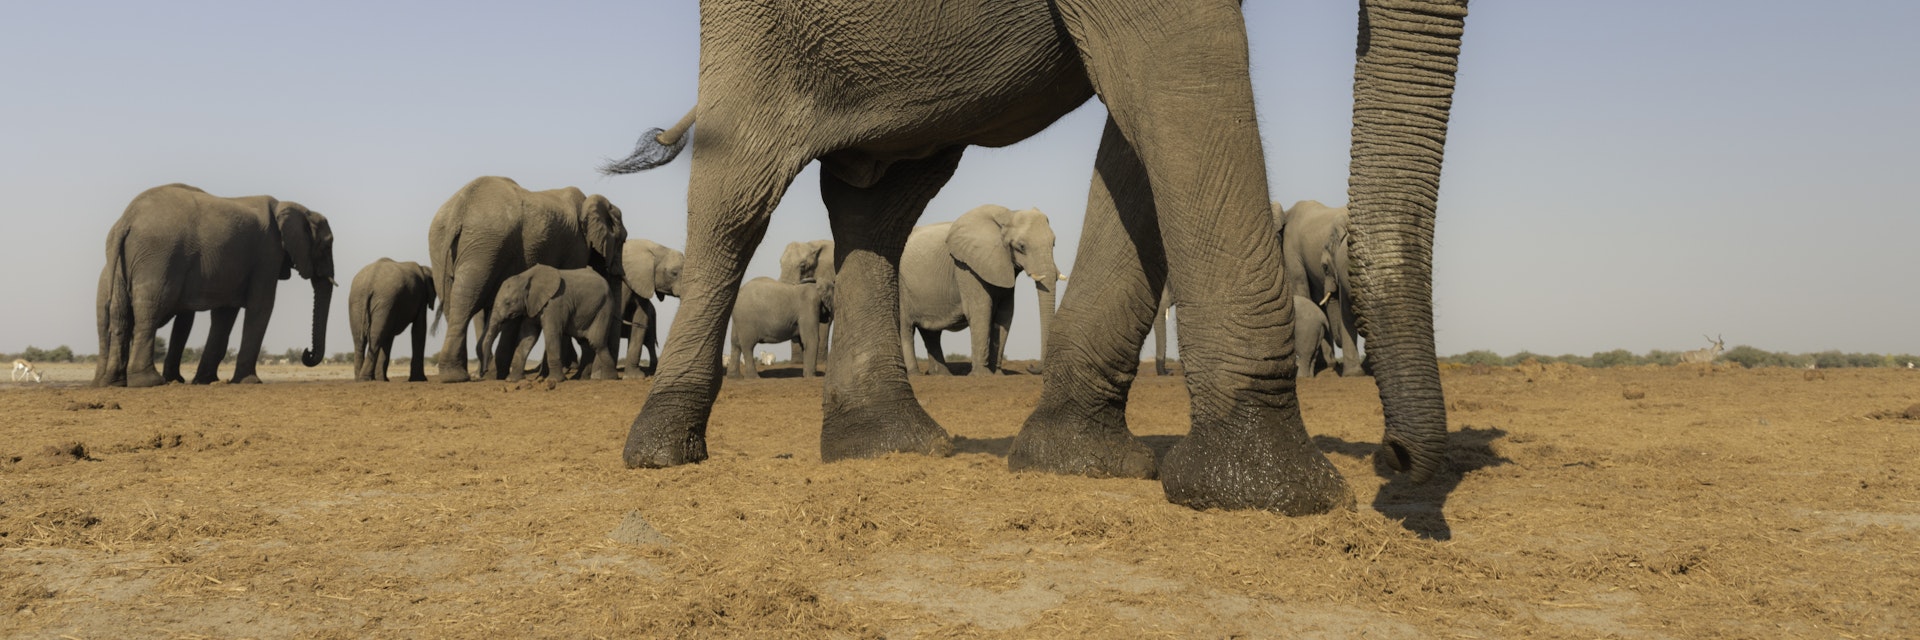 An African Elephant herd (Loxodonta africana) photographed from an underground hide in Etosha, Namibia